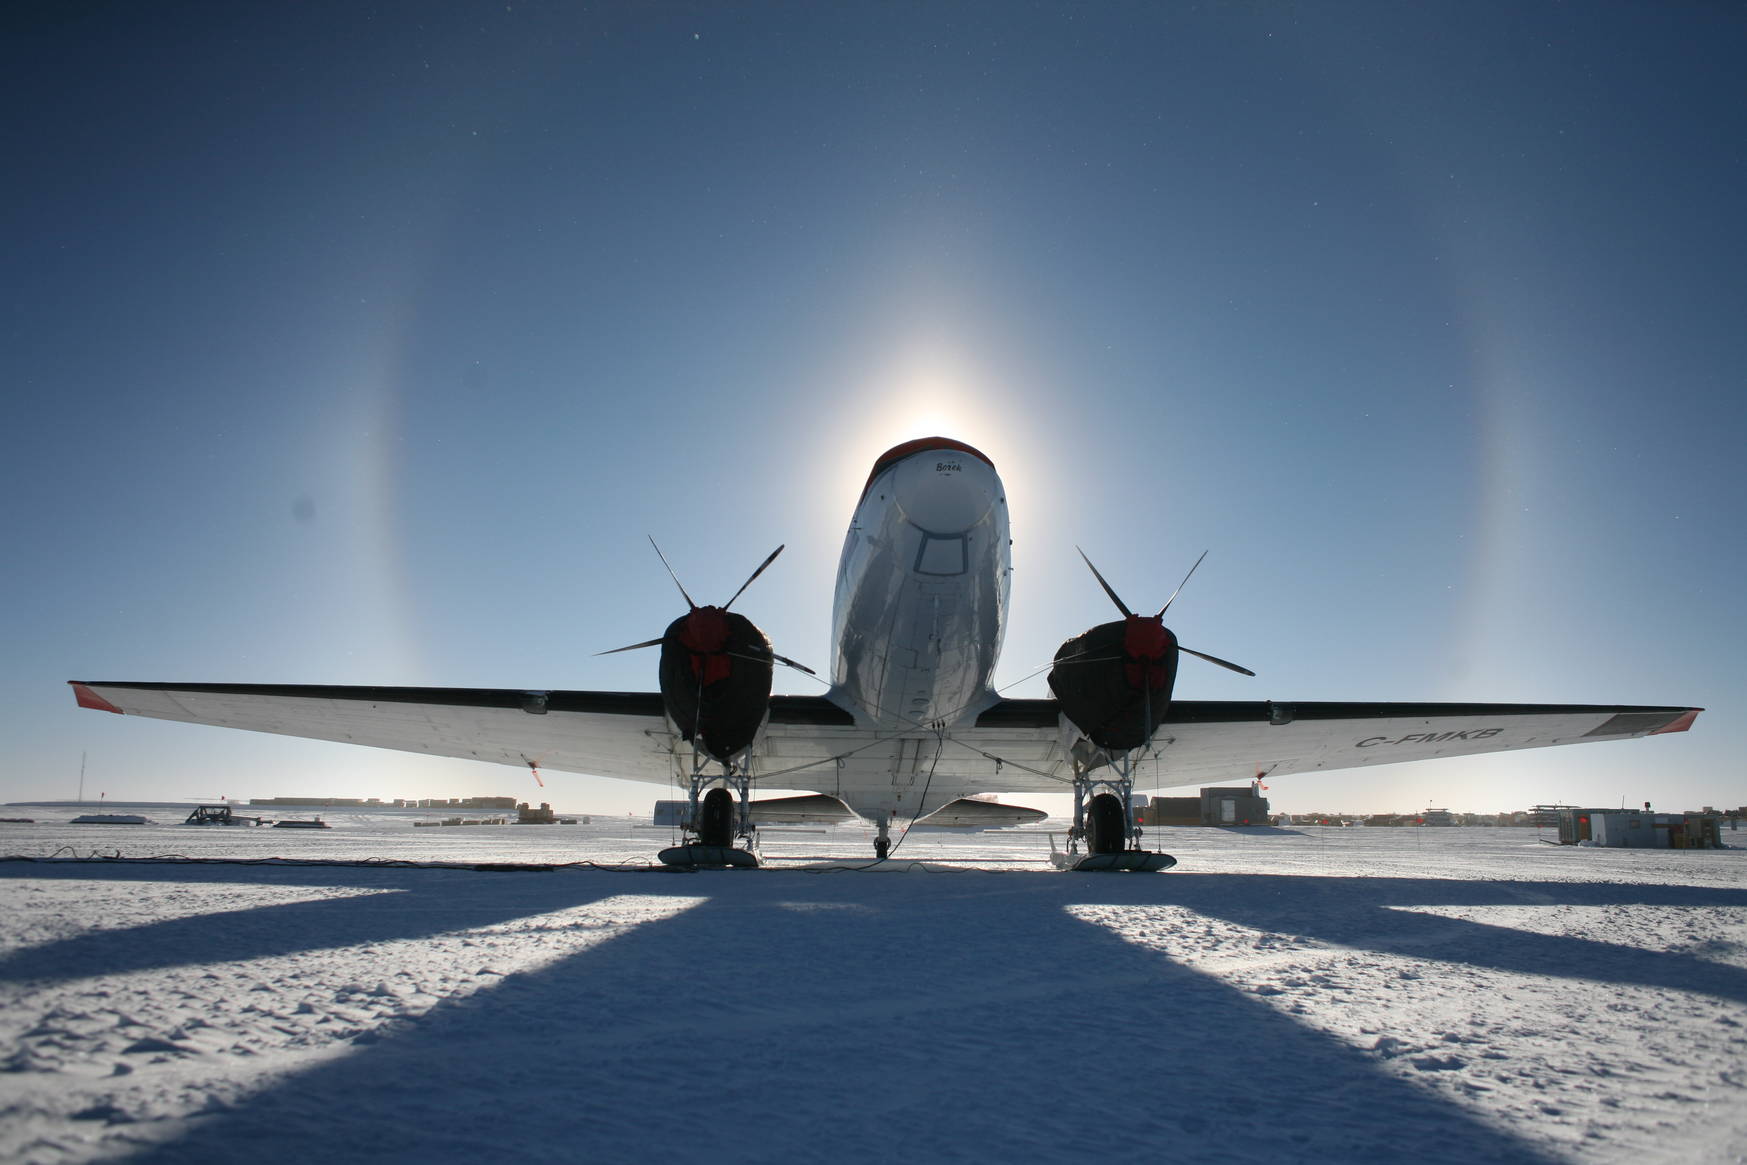 A Basler aircraft surrounded by a halo of the Sun.